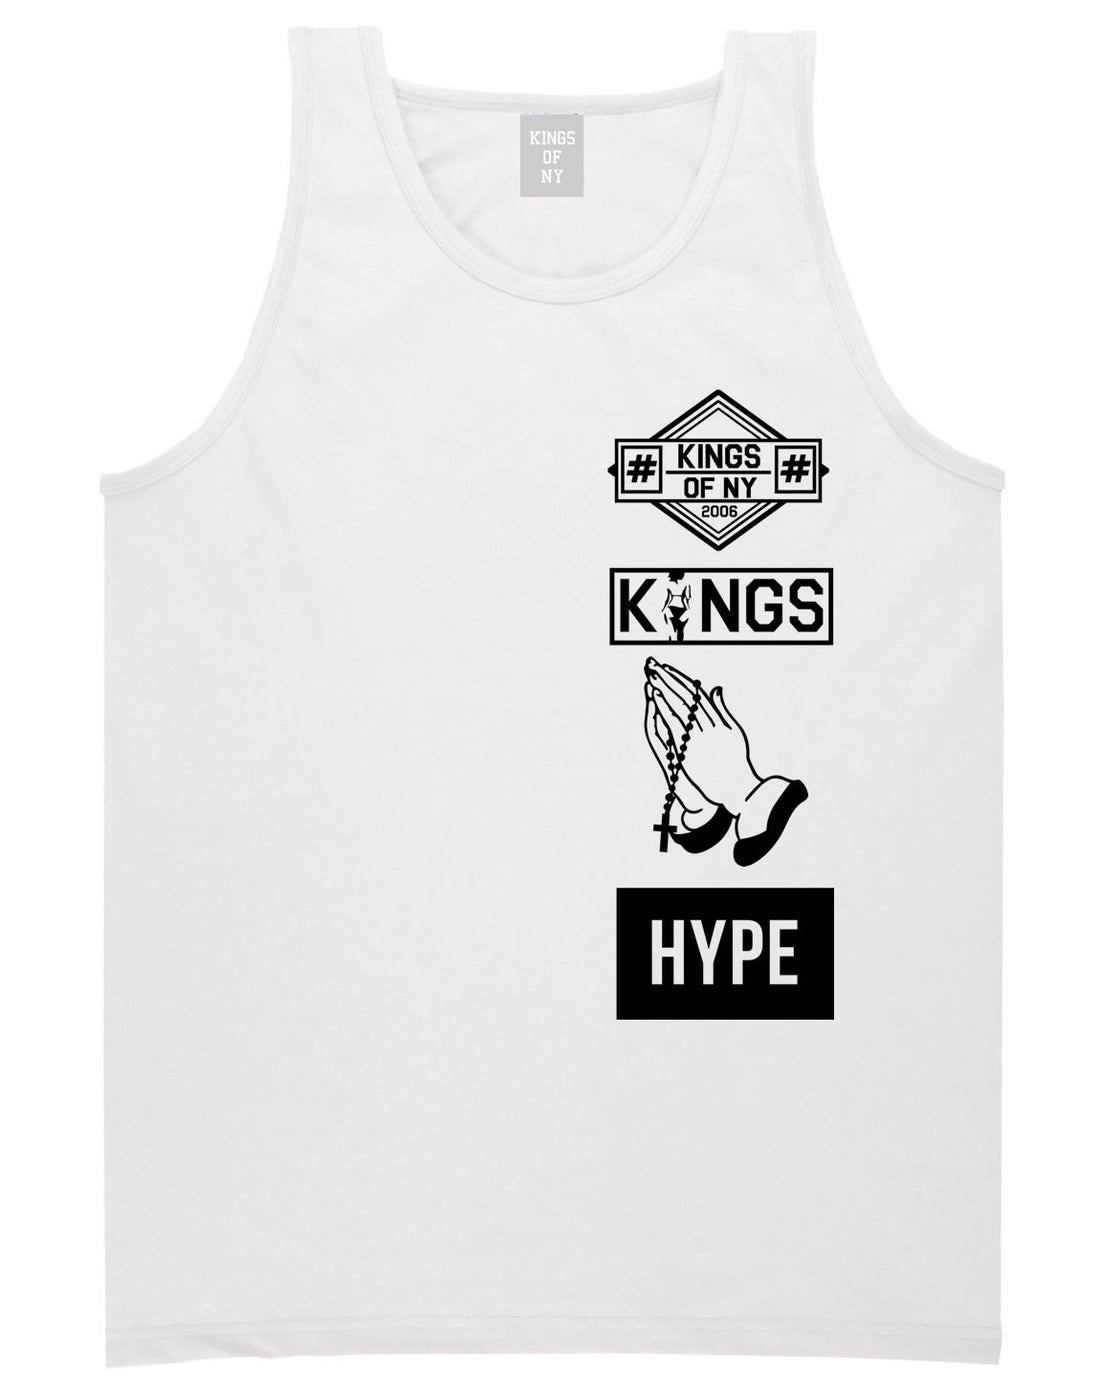 Prayer Hands Hype Left Logos Tank Top in White By Kings Of NY